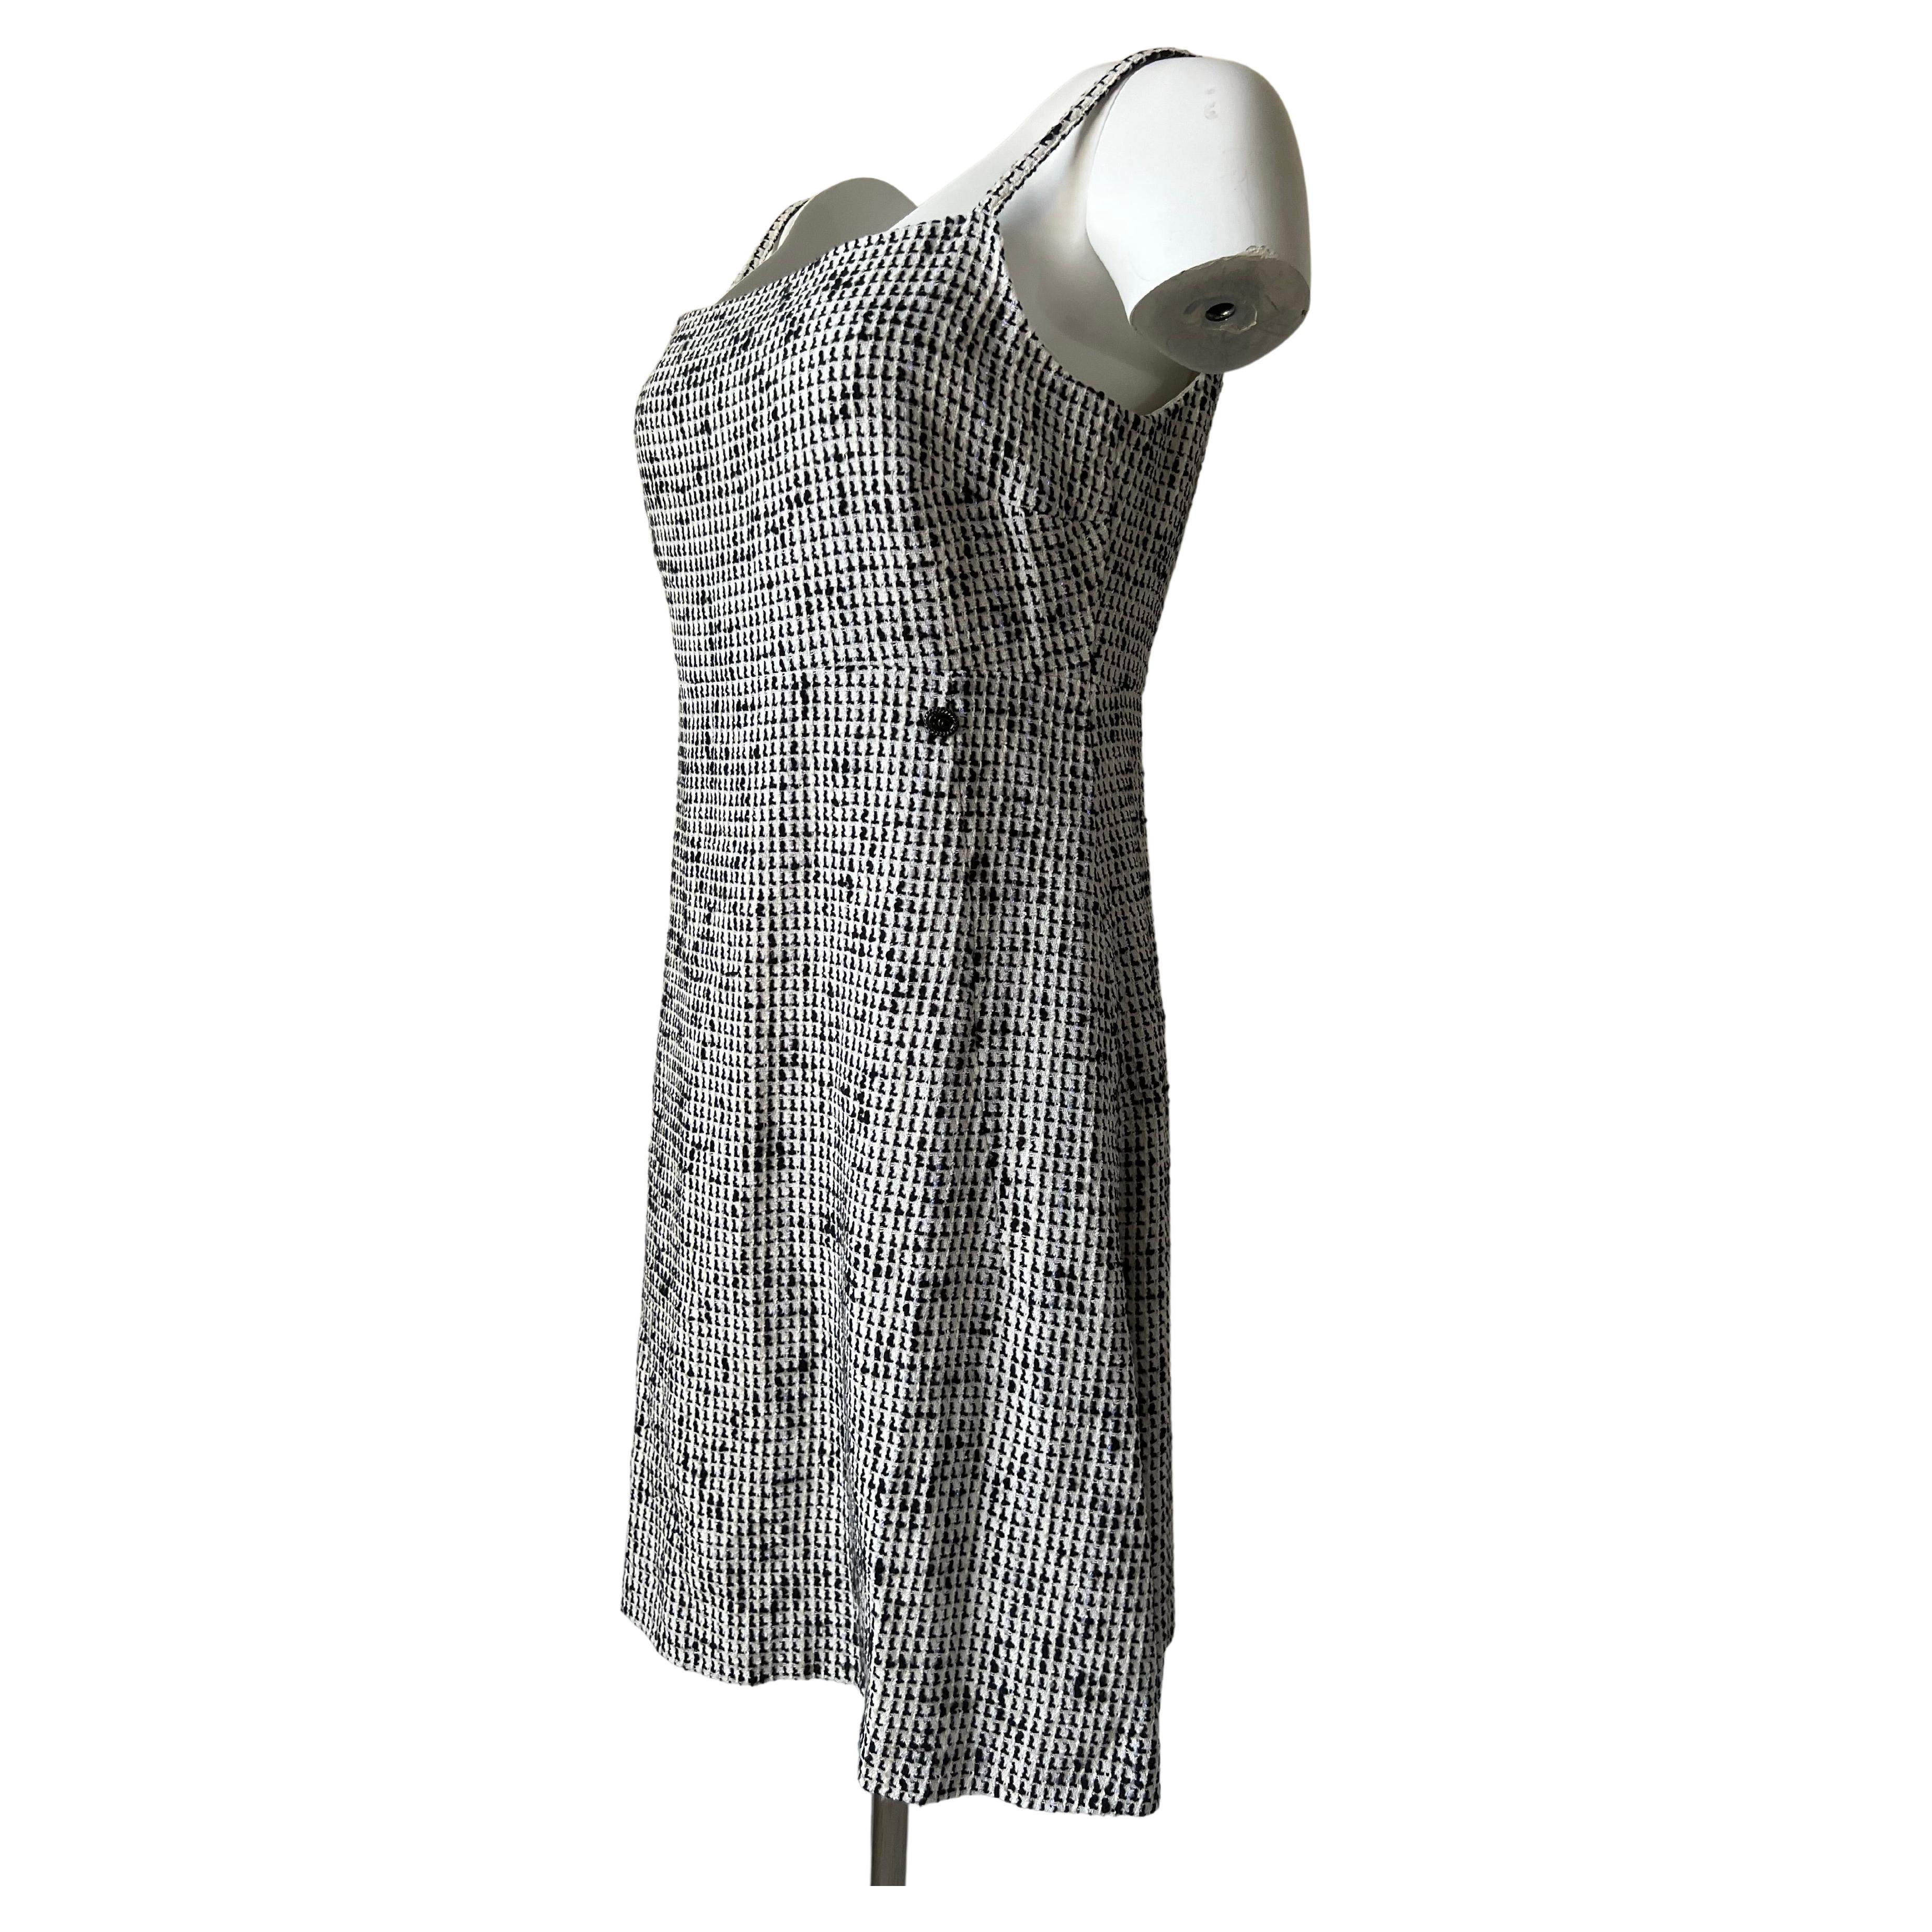 Women's or Men's Black and White Tweed Dress Chanel 2010 For Sale